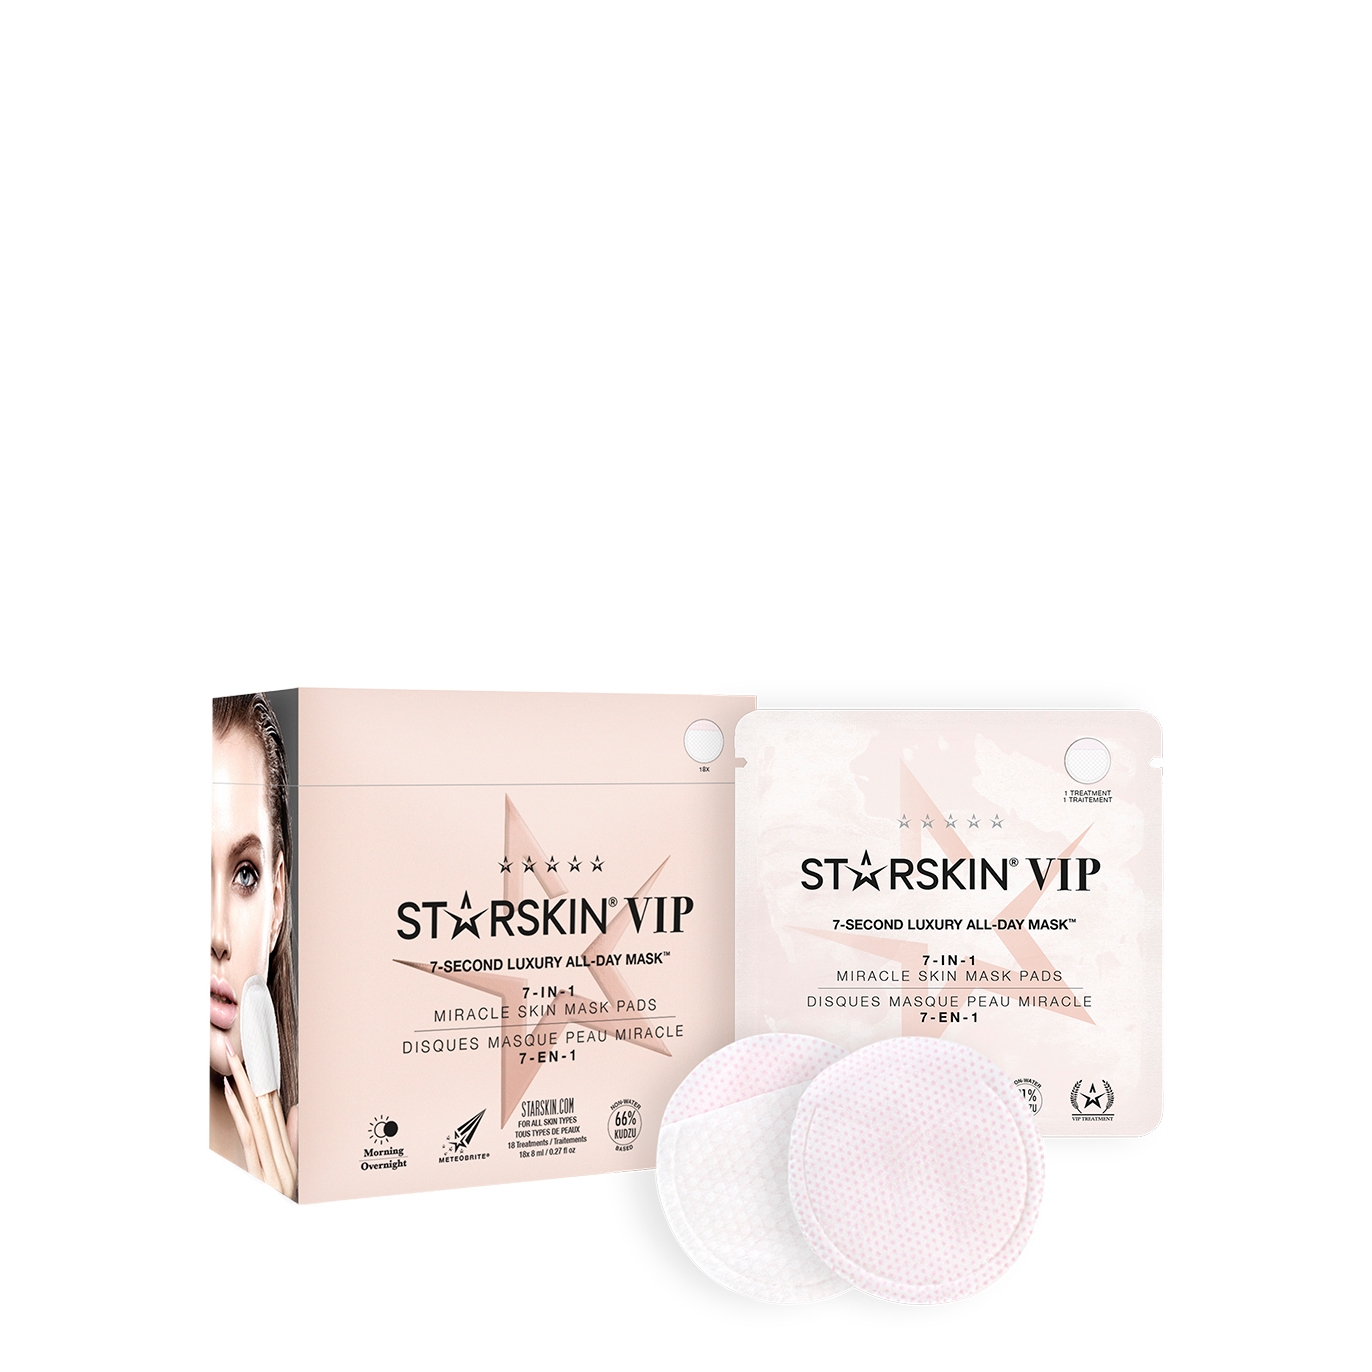 Vip 7-Second Luxury All-Day Mask